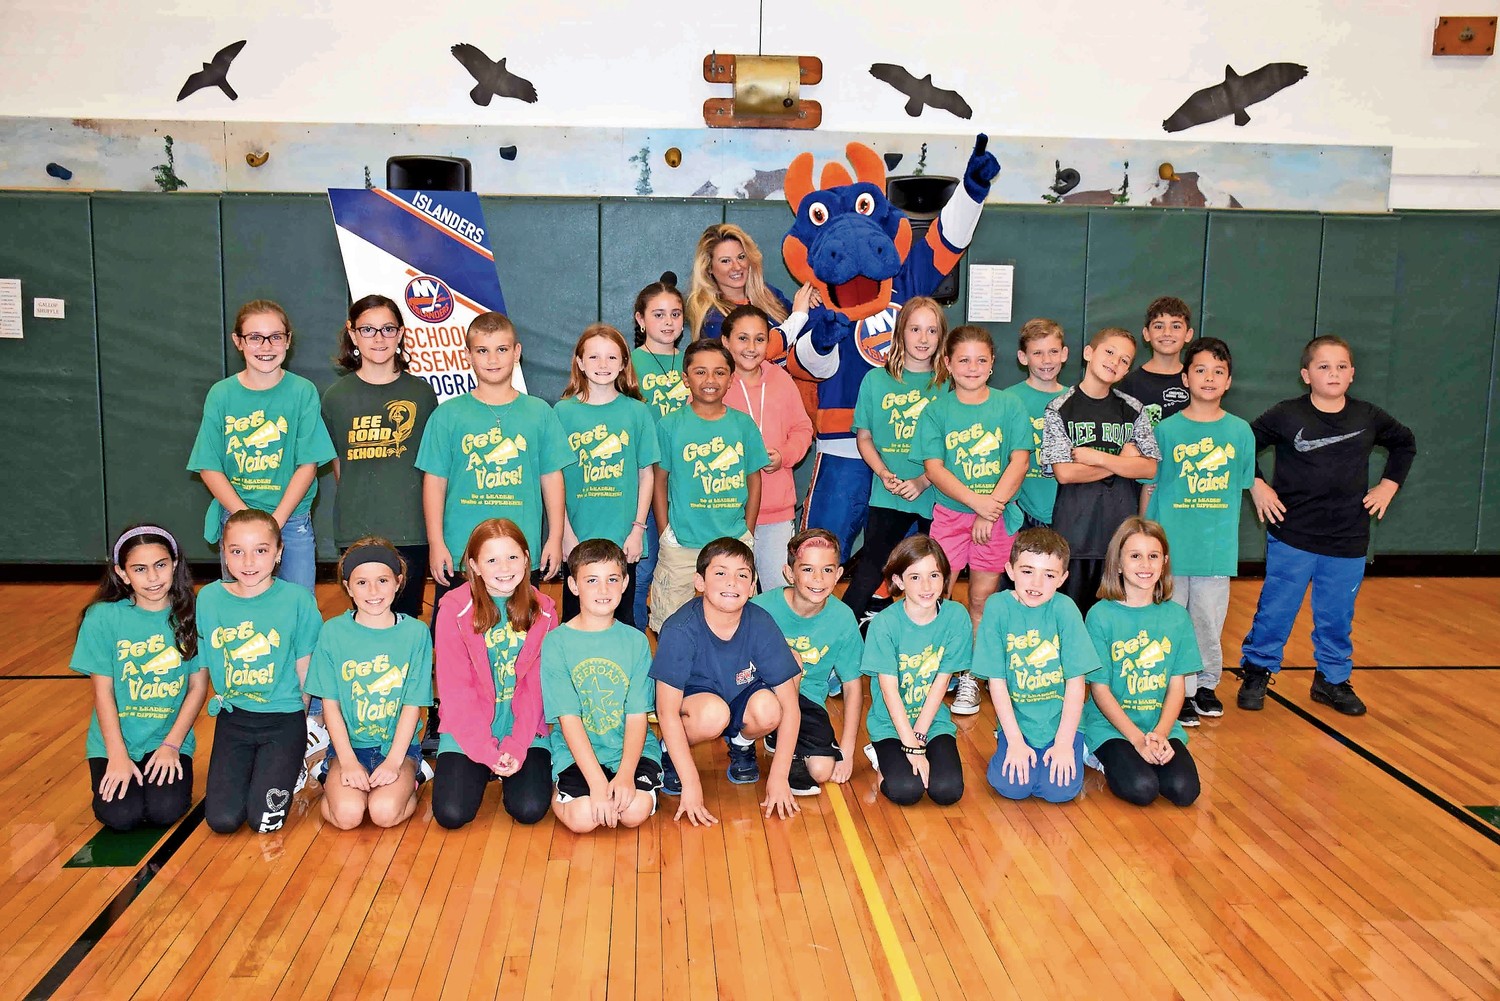 Fourth-grade students at Lee Road Elementary School celebrated the 10th year of its Get-A-Voice Character Education Program on Oct. 24. New York Islanders representative Dina Tsiorvas and mascot Sparky the Dragon attended the kickoff.